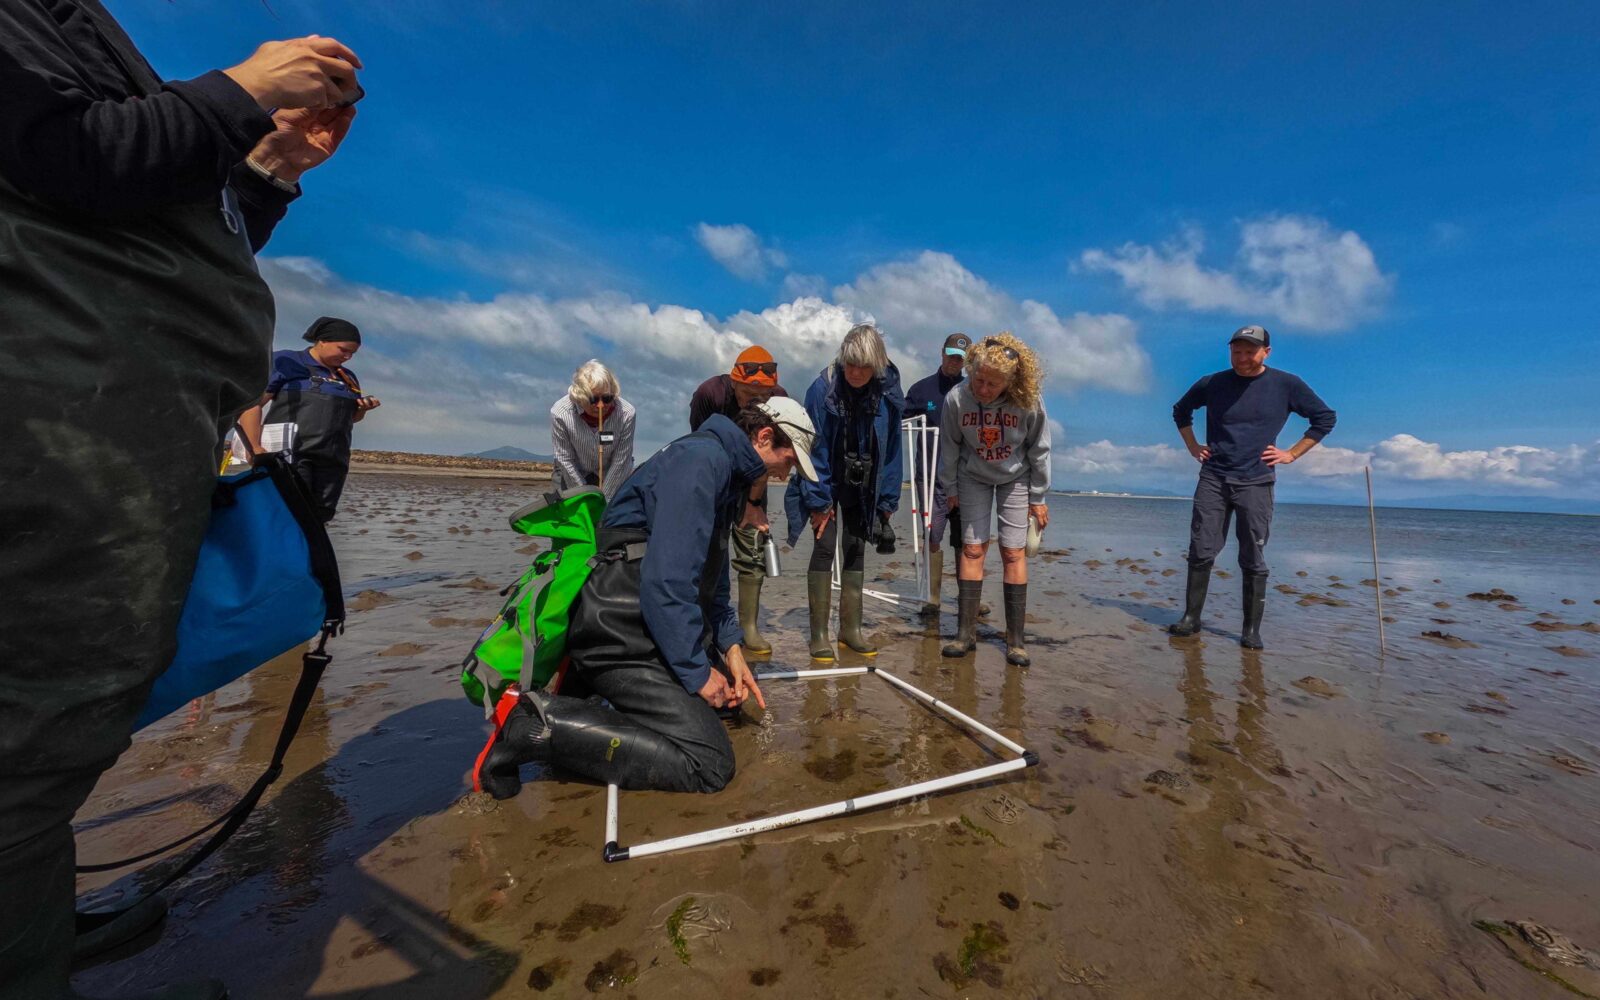 A group of Project Seagrass staff and volunteers are gathered on a beach in North Wales as part of our May fieldwork. Our North Wales project lead is kneeling by a quadrat providing a demonstration of how to monitor seagrass.